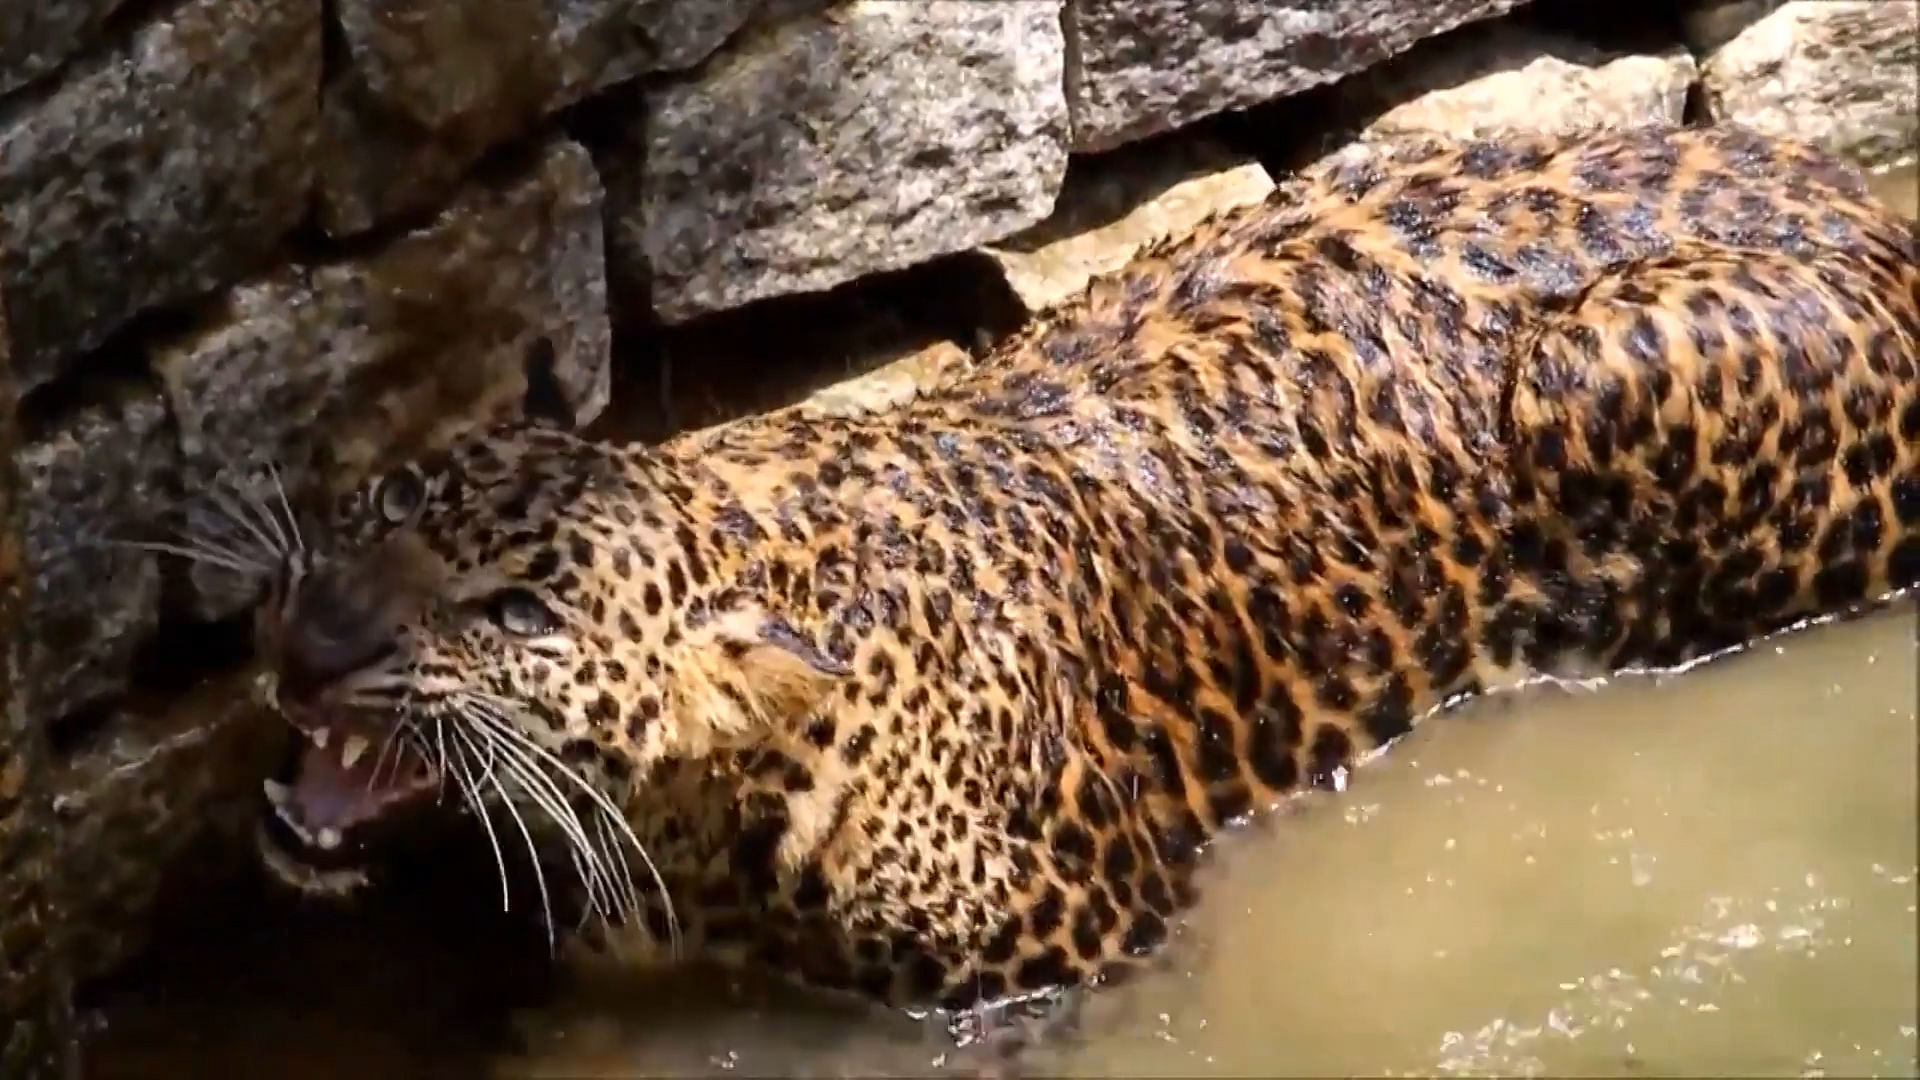 In June last year, a leopard trapped in a well in Mudrady, Udupi district of Karnataka. (Photo: AP screengrab) 